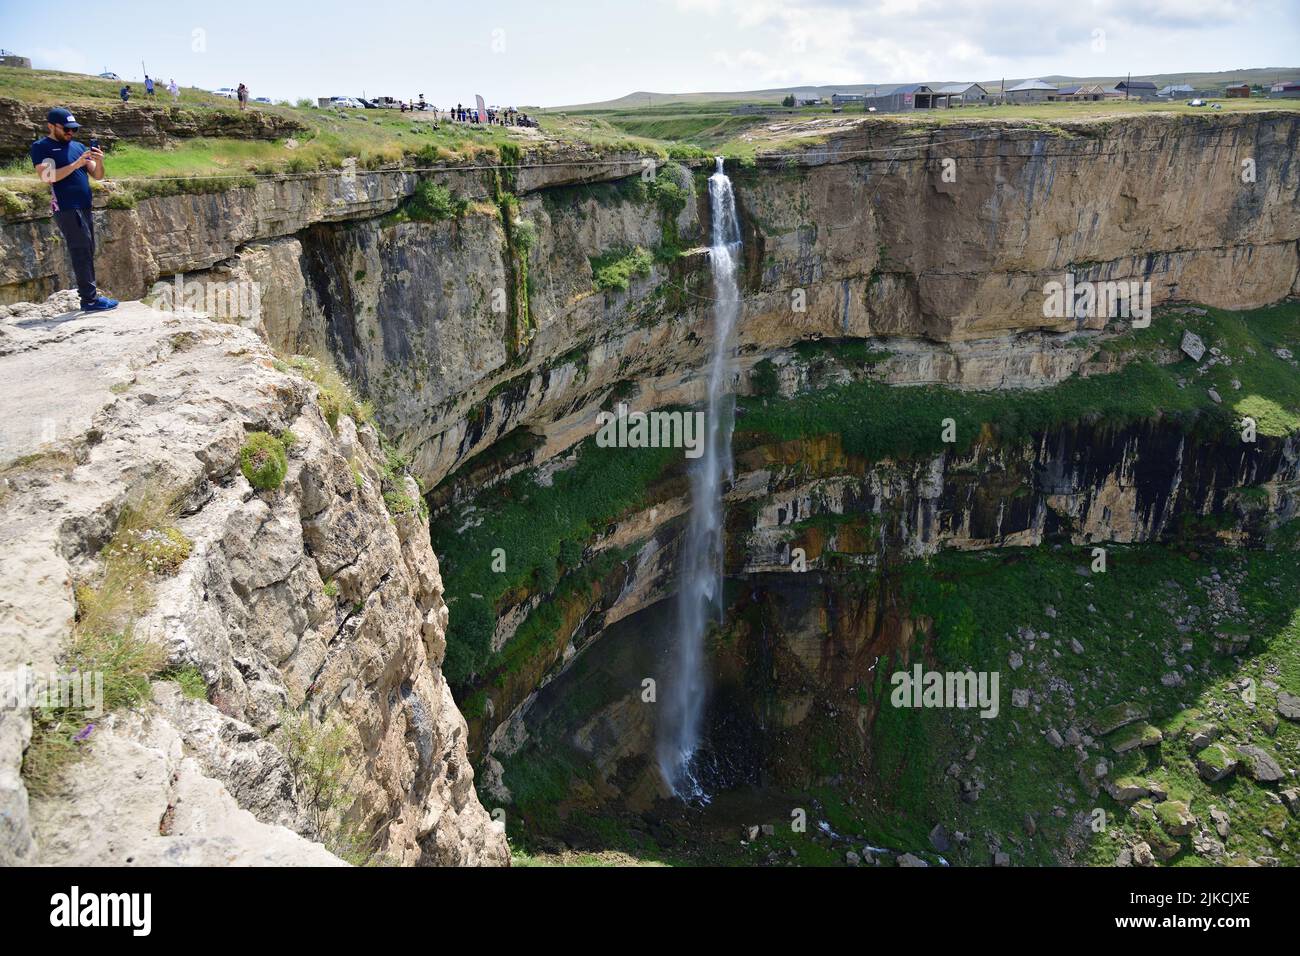 Dagestan, Russia - 21 July, 2022:  Tourists visit the Itlyatlyar Waterfall. Hunzah. Canyon Of Khunzakh. Sights Of The Caucasus mountains. Russia, Dage Stock Photo